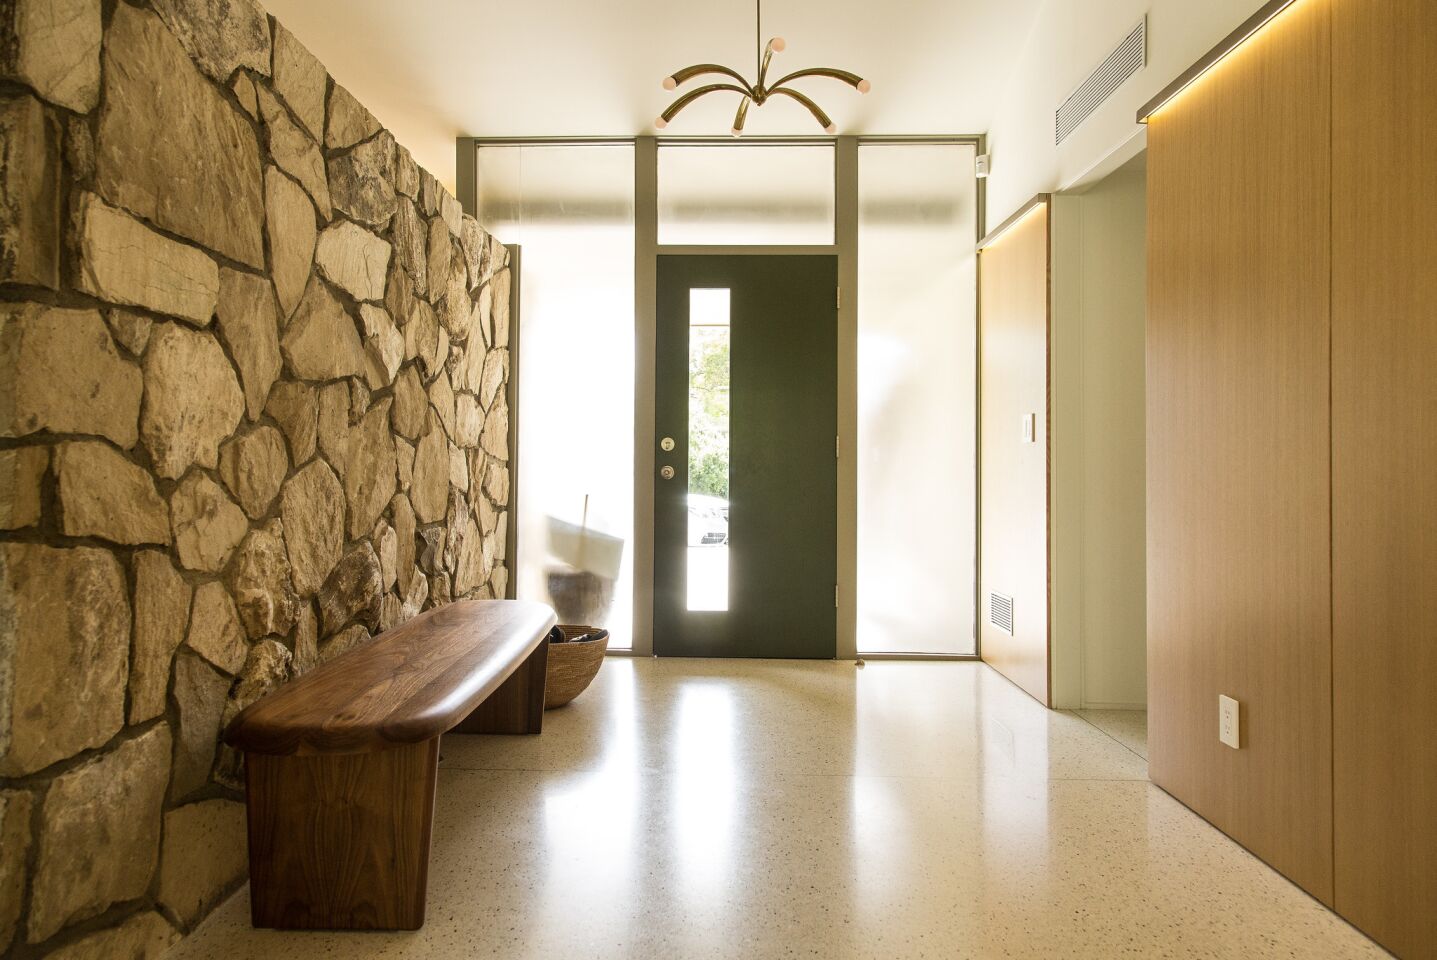 Poured-in-place white terrazzo flooring brightens the entry and corridor.